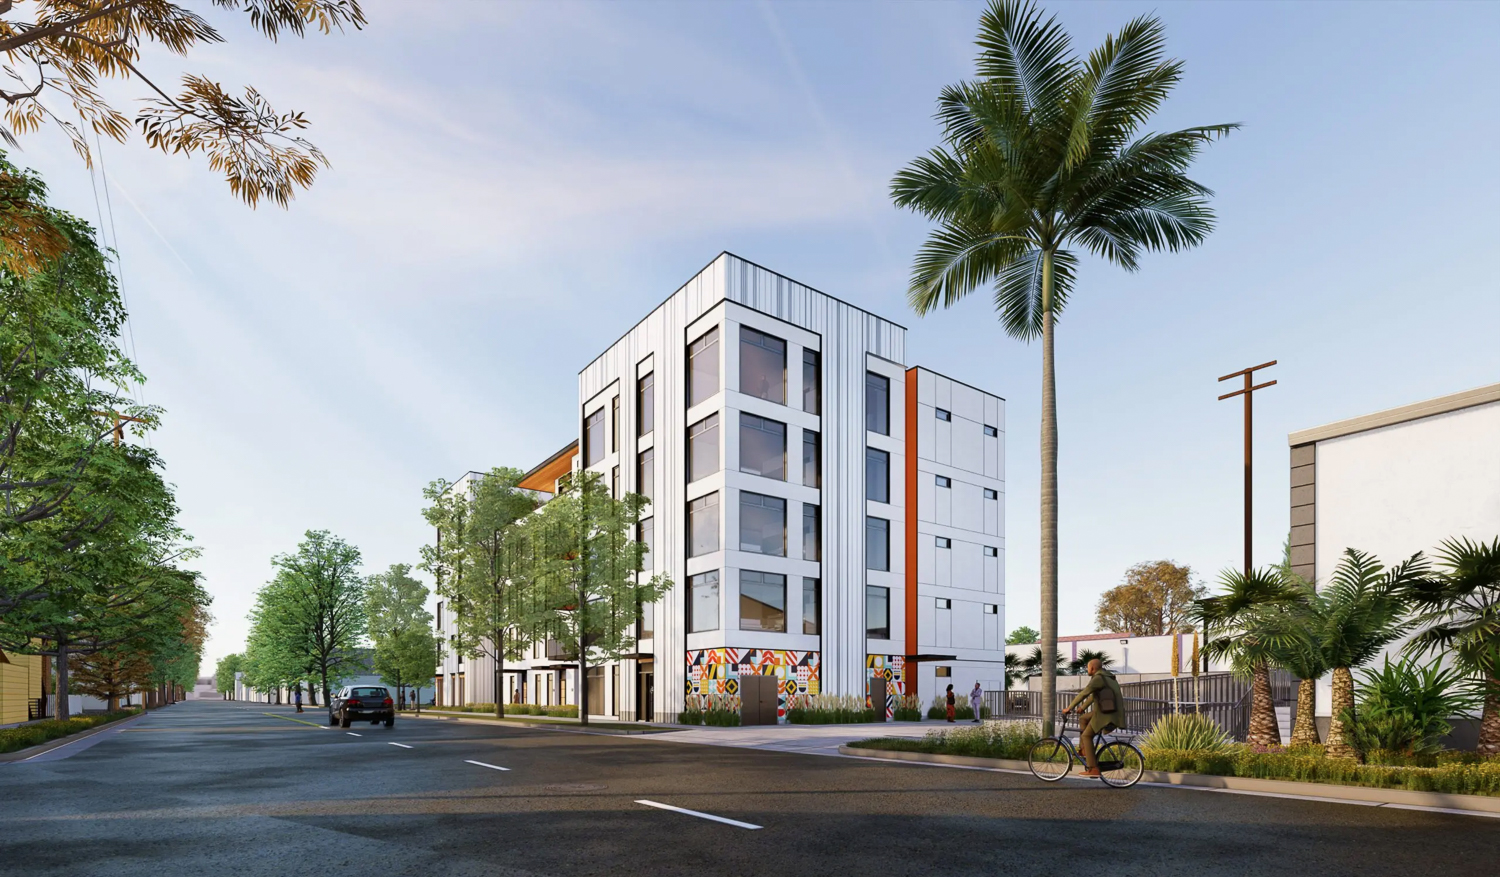 20th Place Project at 1925 F Street seen from Eggplant Alley, rendering by C2K Architecture